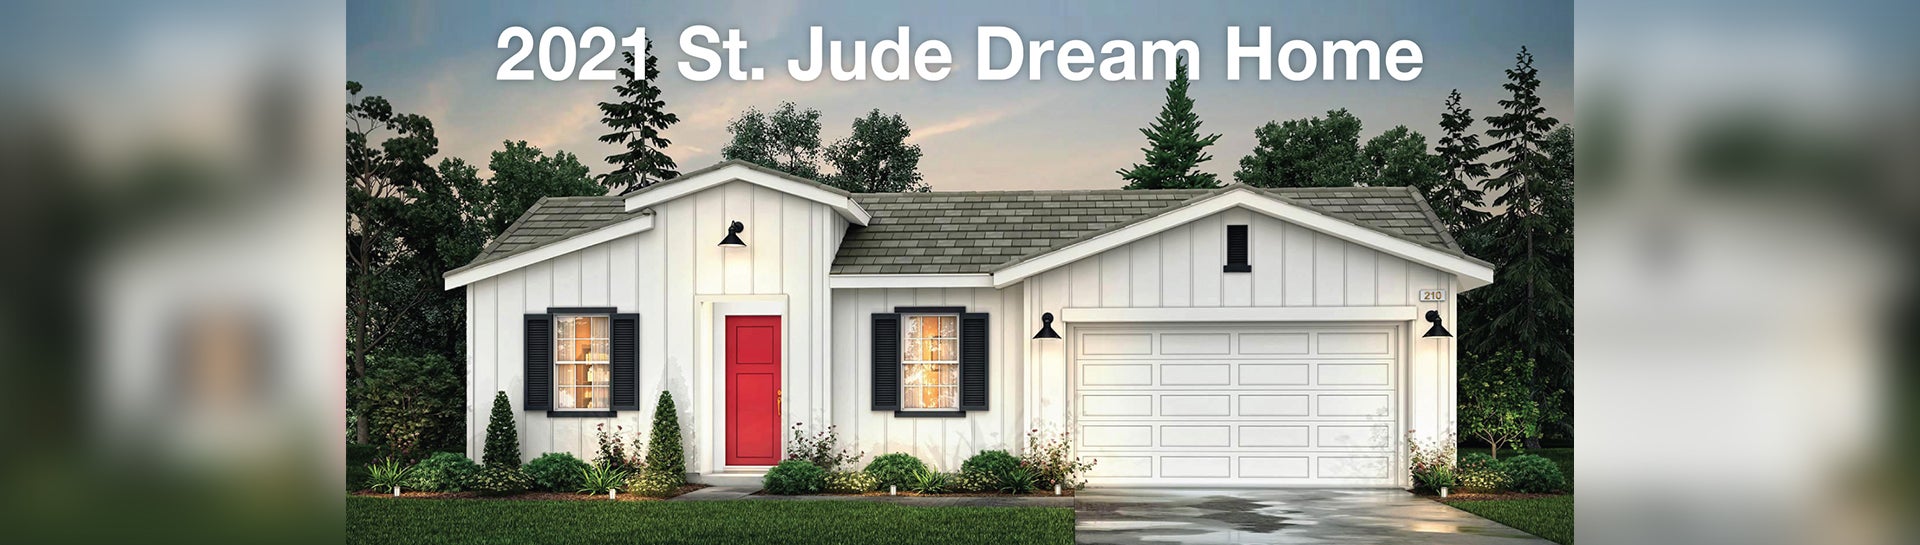 Last Chance To Reserve Your Ticket For The 2021 St. Jude Dream Home! Don’t Forget to Watch The Show on November 21!